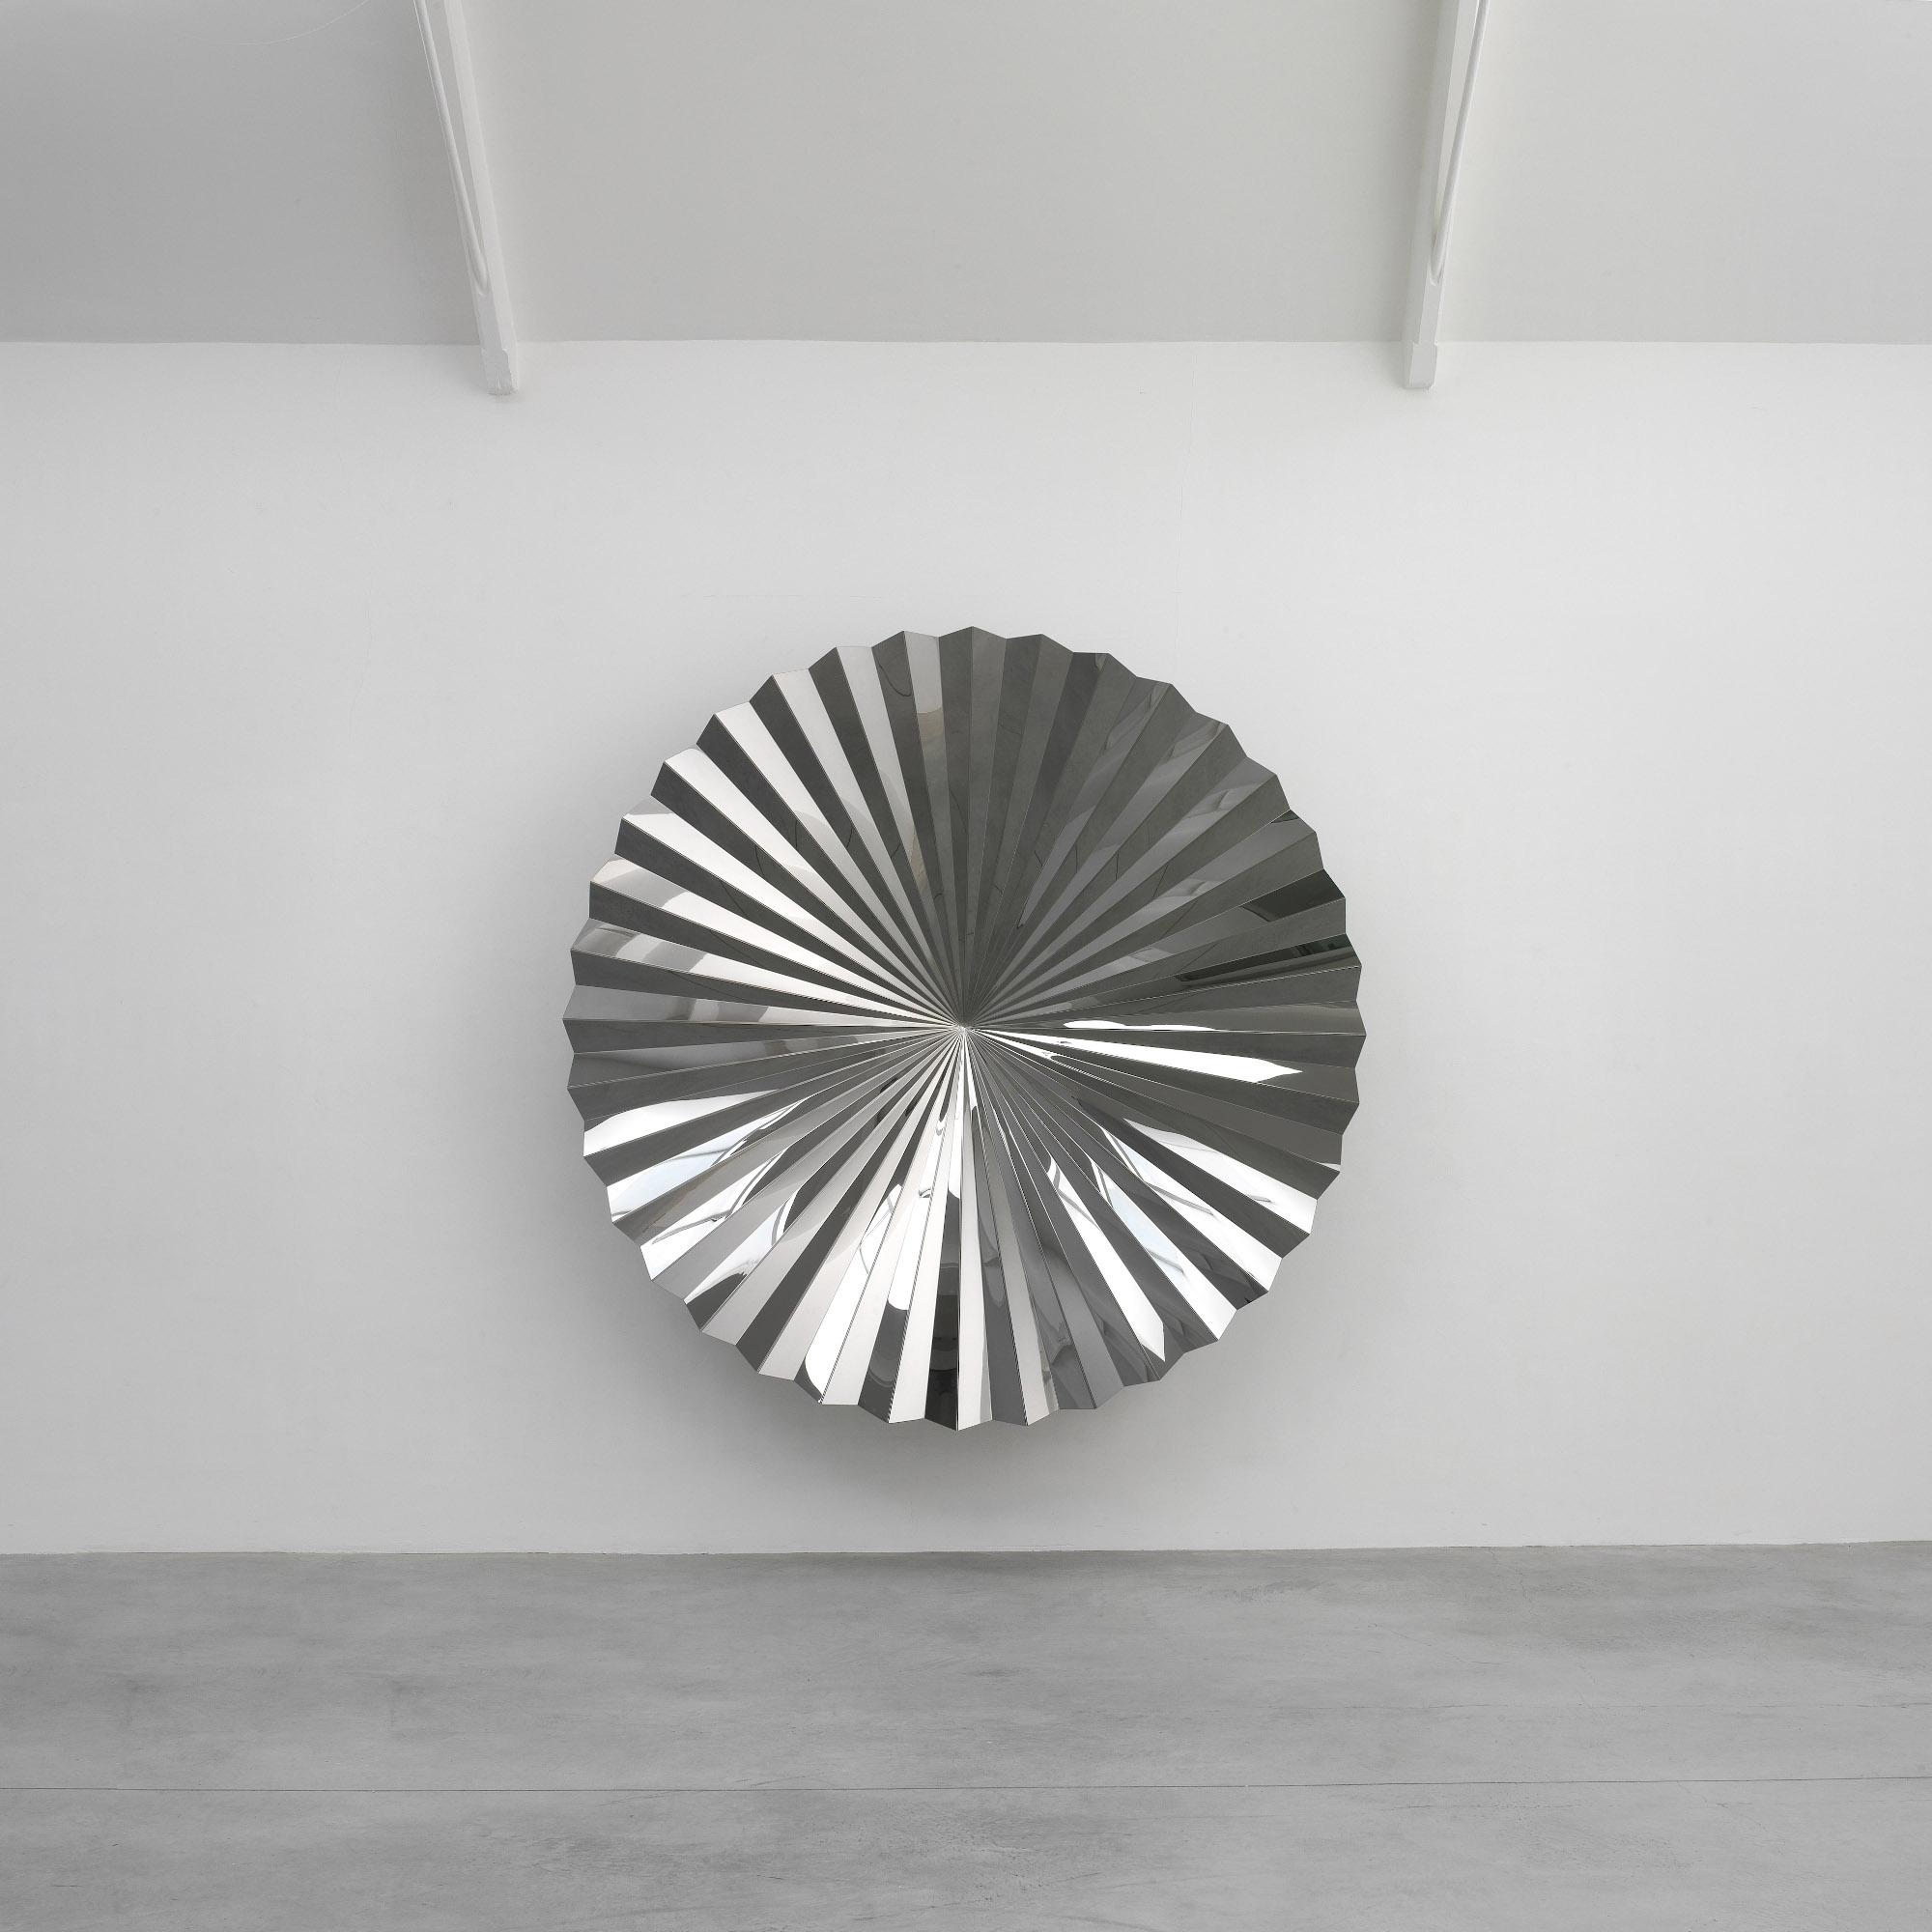 Anish-Kapoor-Untitled-2009-Stainless-steel-Courtesy-the-artist-and-Lisson-Gallery